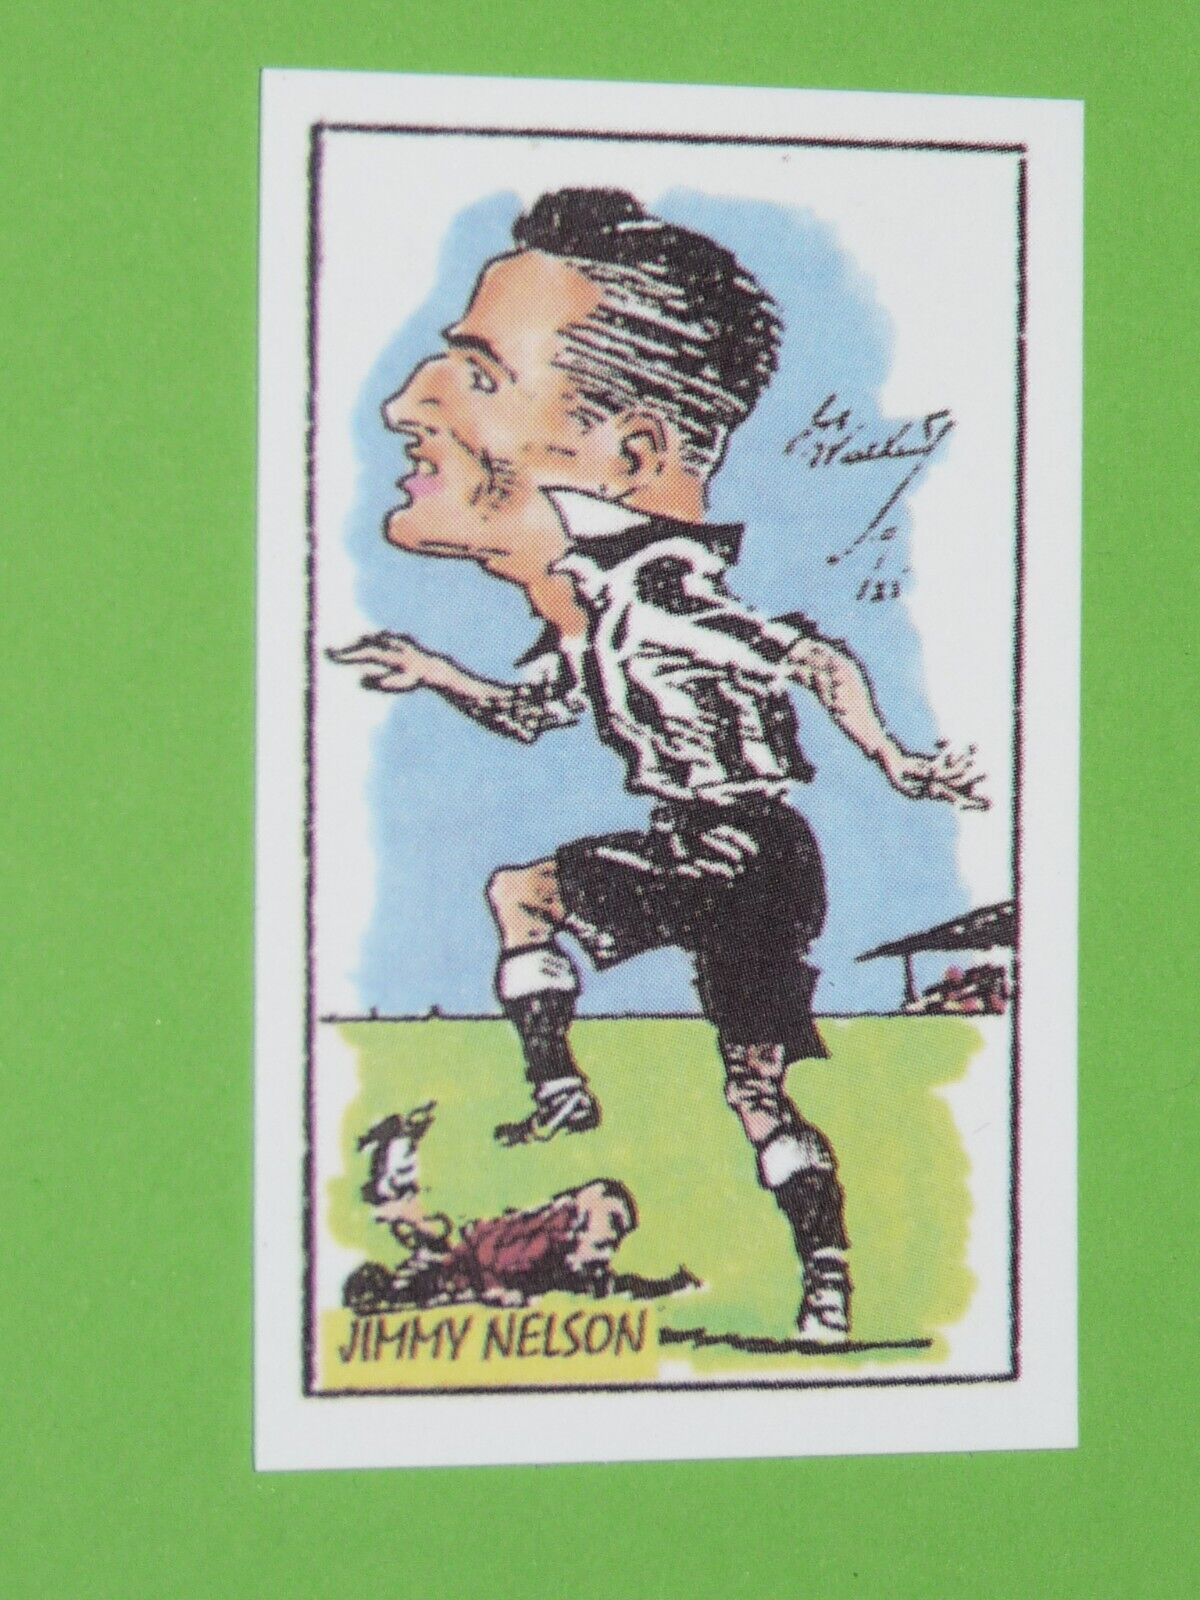 1995 RICHARDS COLLECTION CARD FOOTBALL #10 JIMMY NELSON NEWCASTLE UNITED MAGPIES